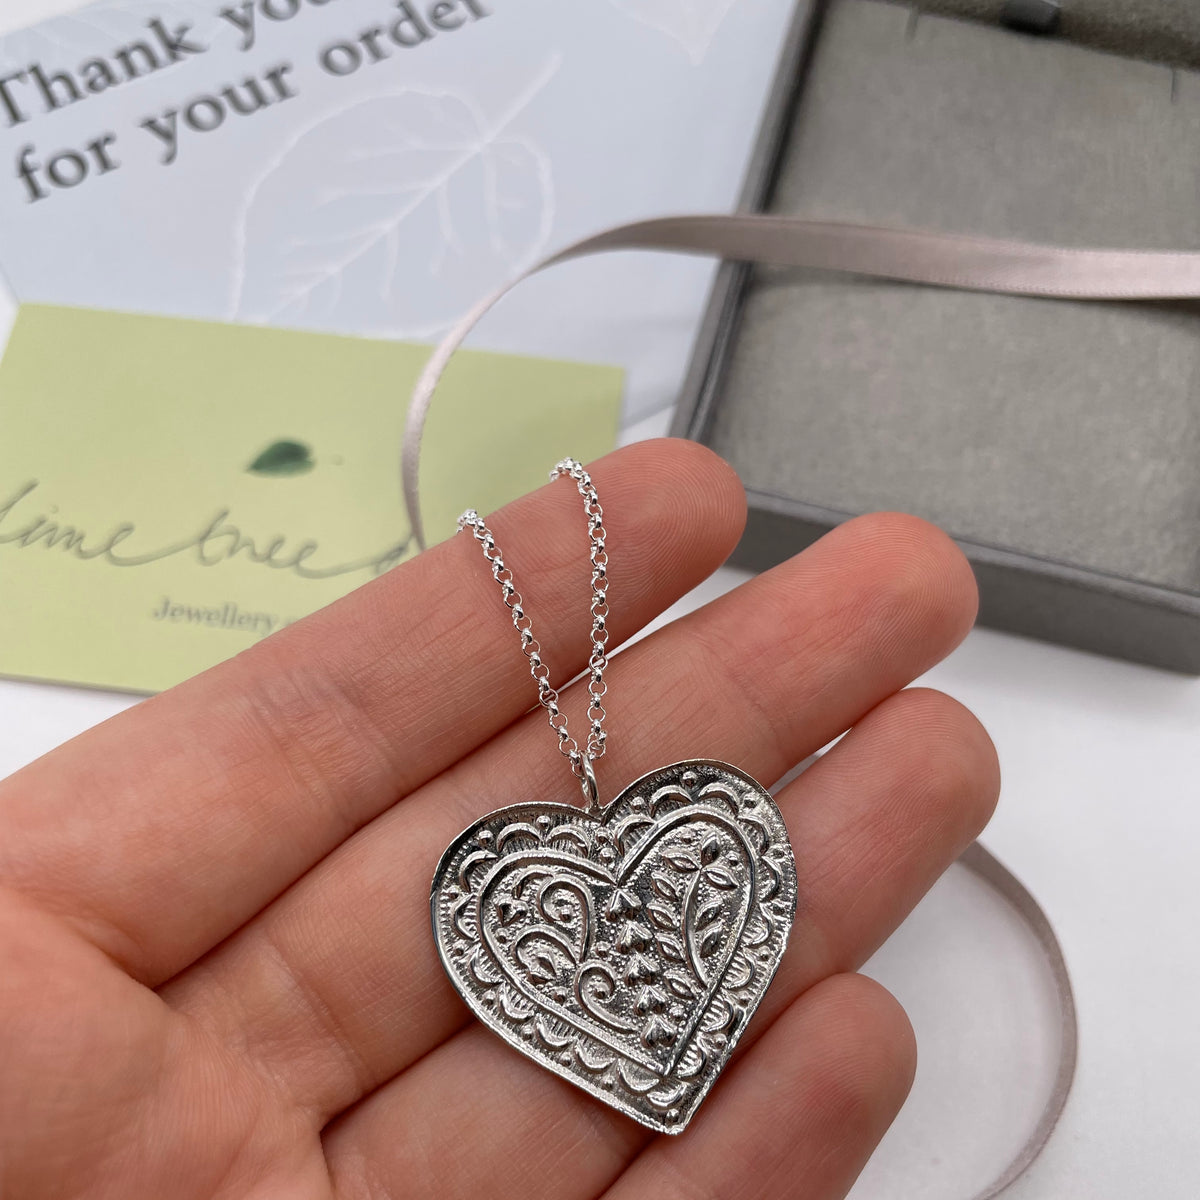 chieko+ ハートネックレスheart necklace silver - ネックレス